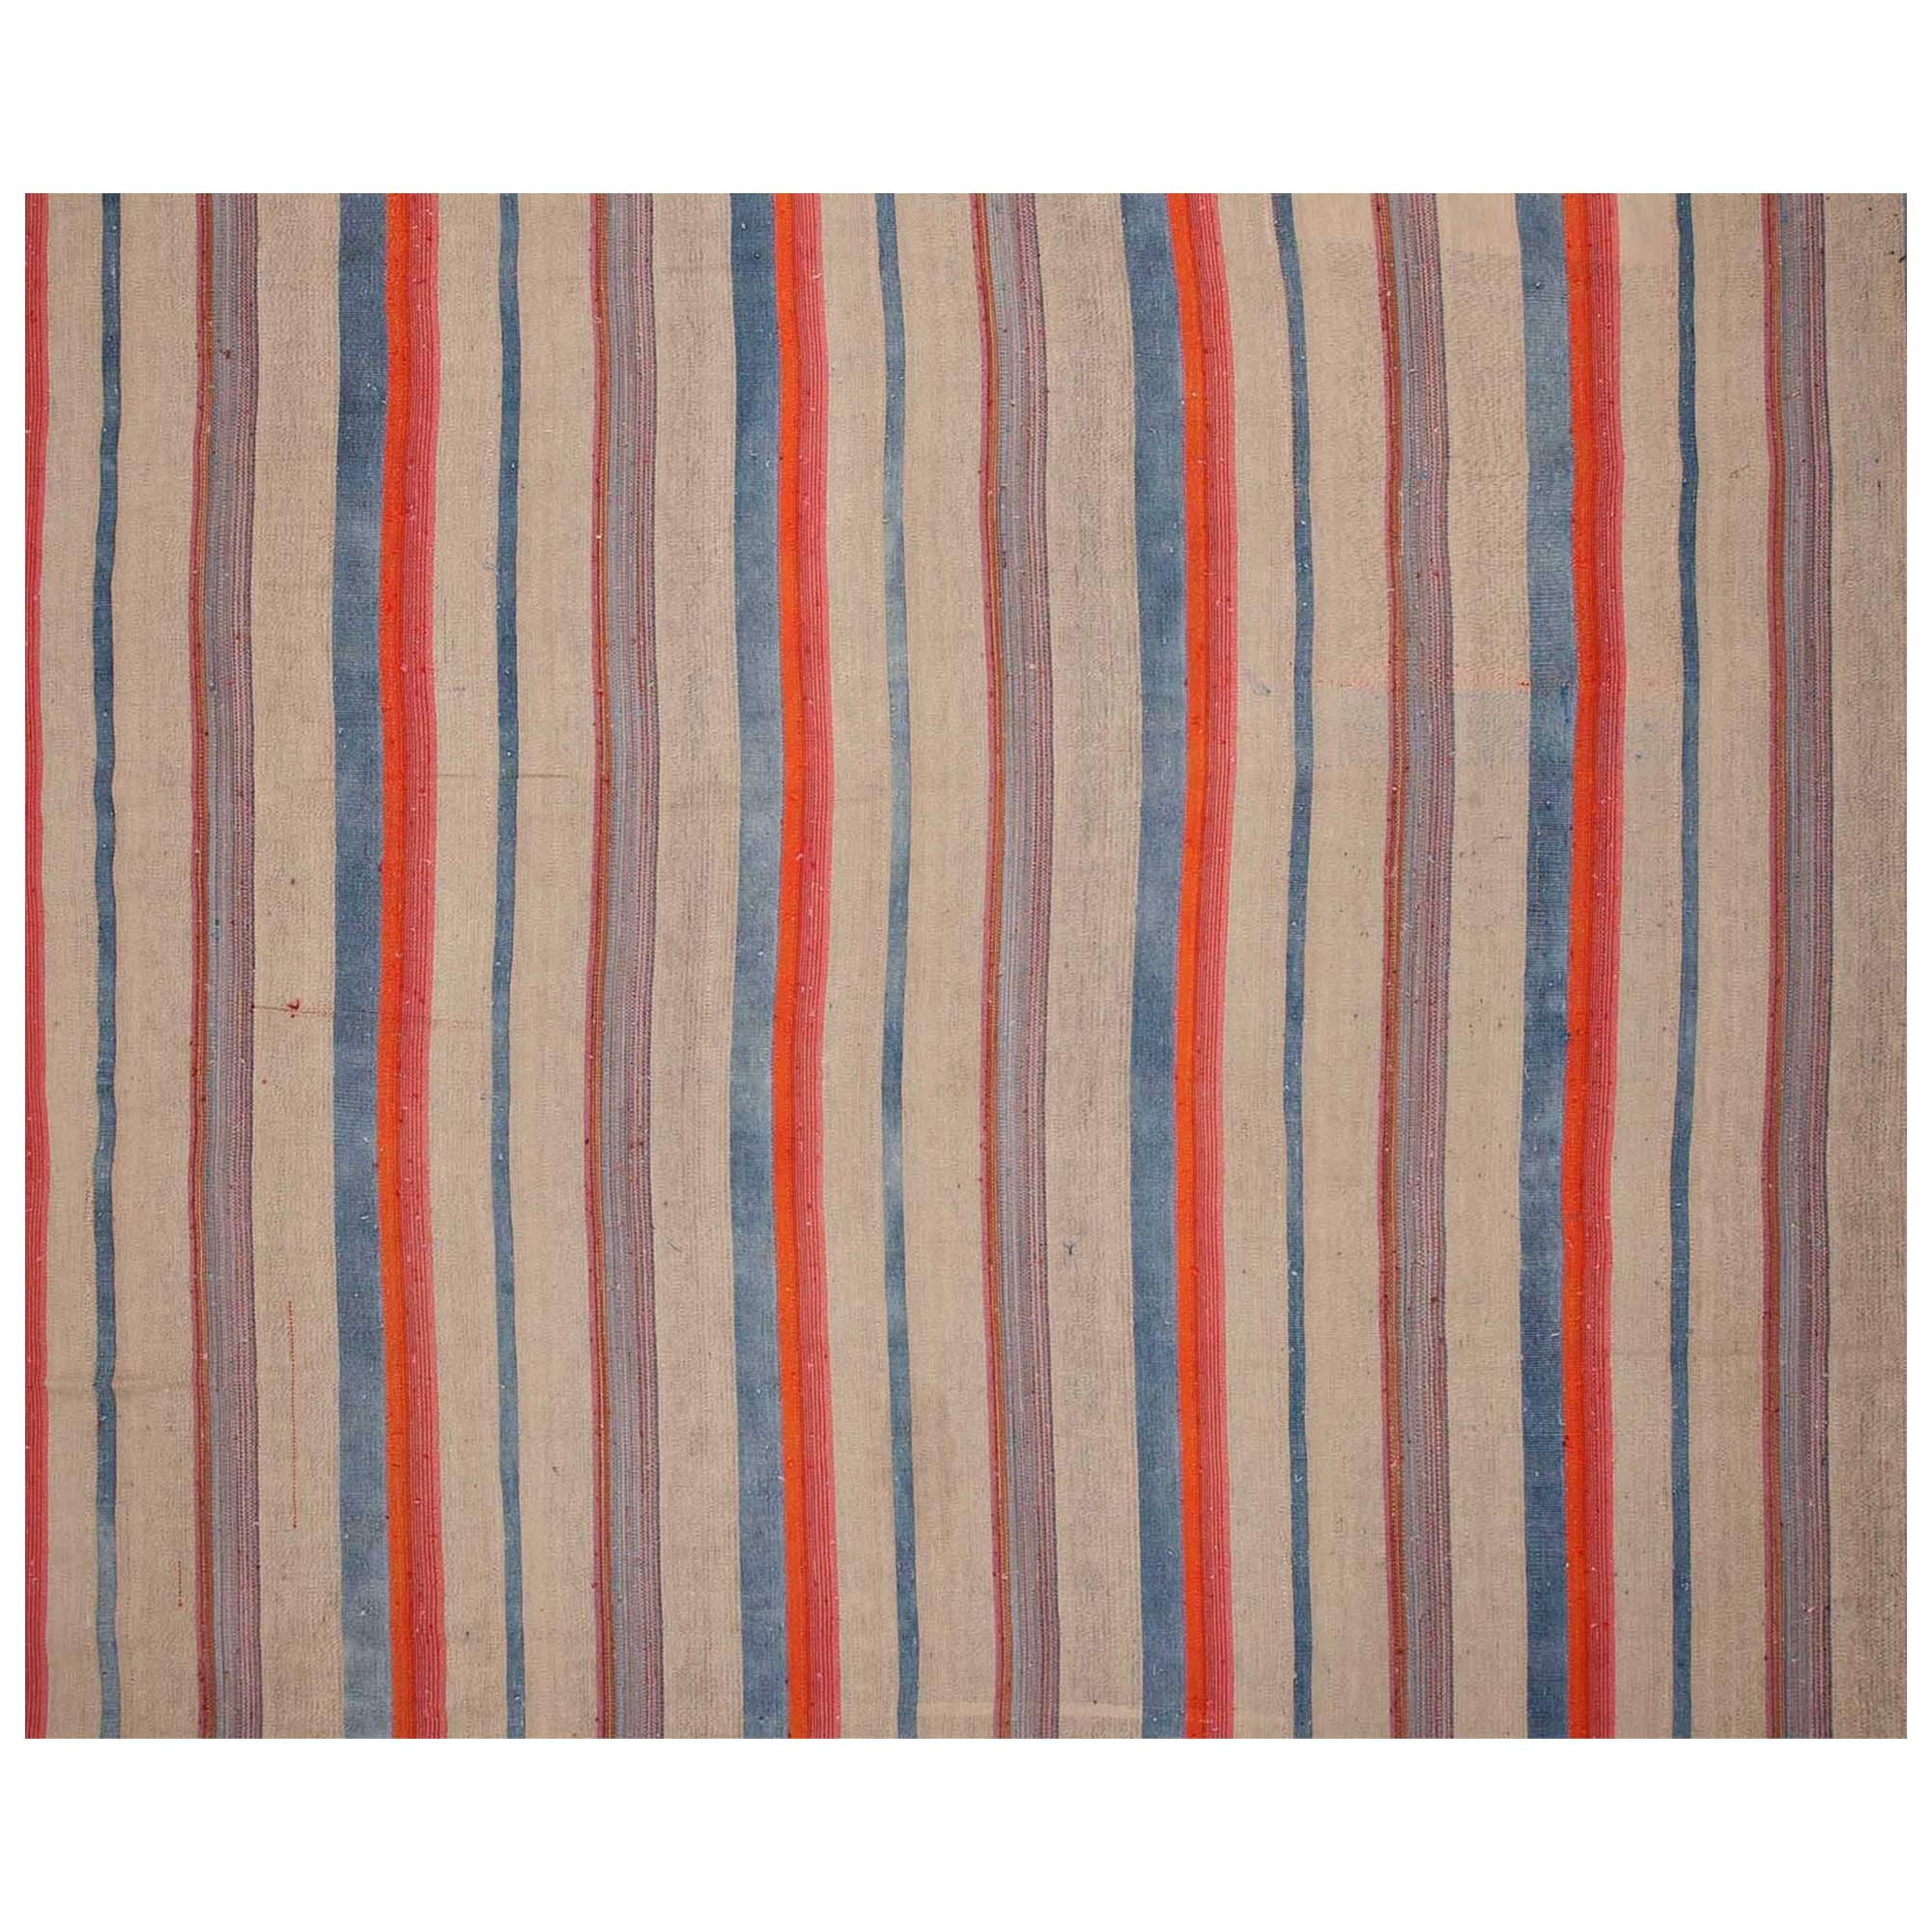 Kilim, Flat-Weave Jajim from Southern Turkey, Mid-20th Century For Sale